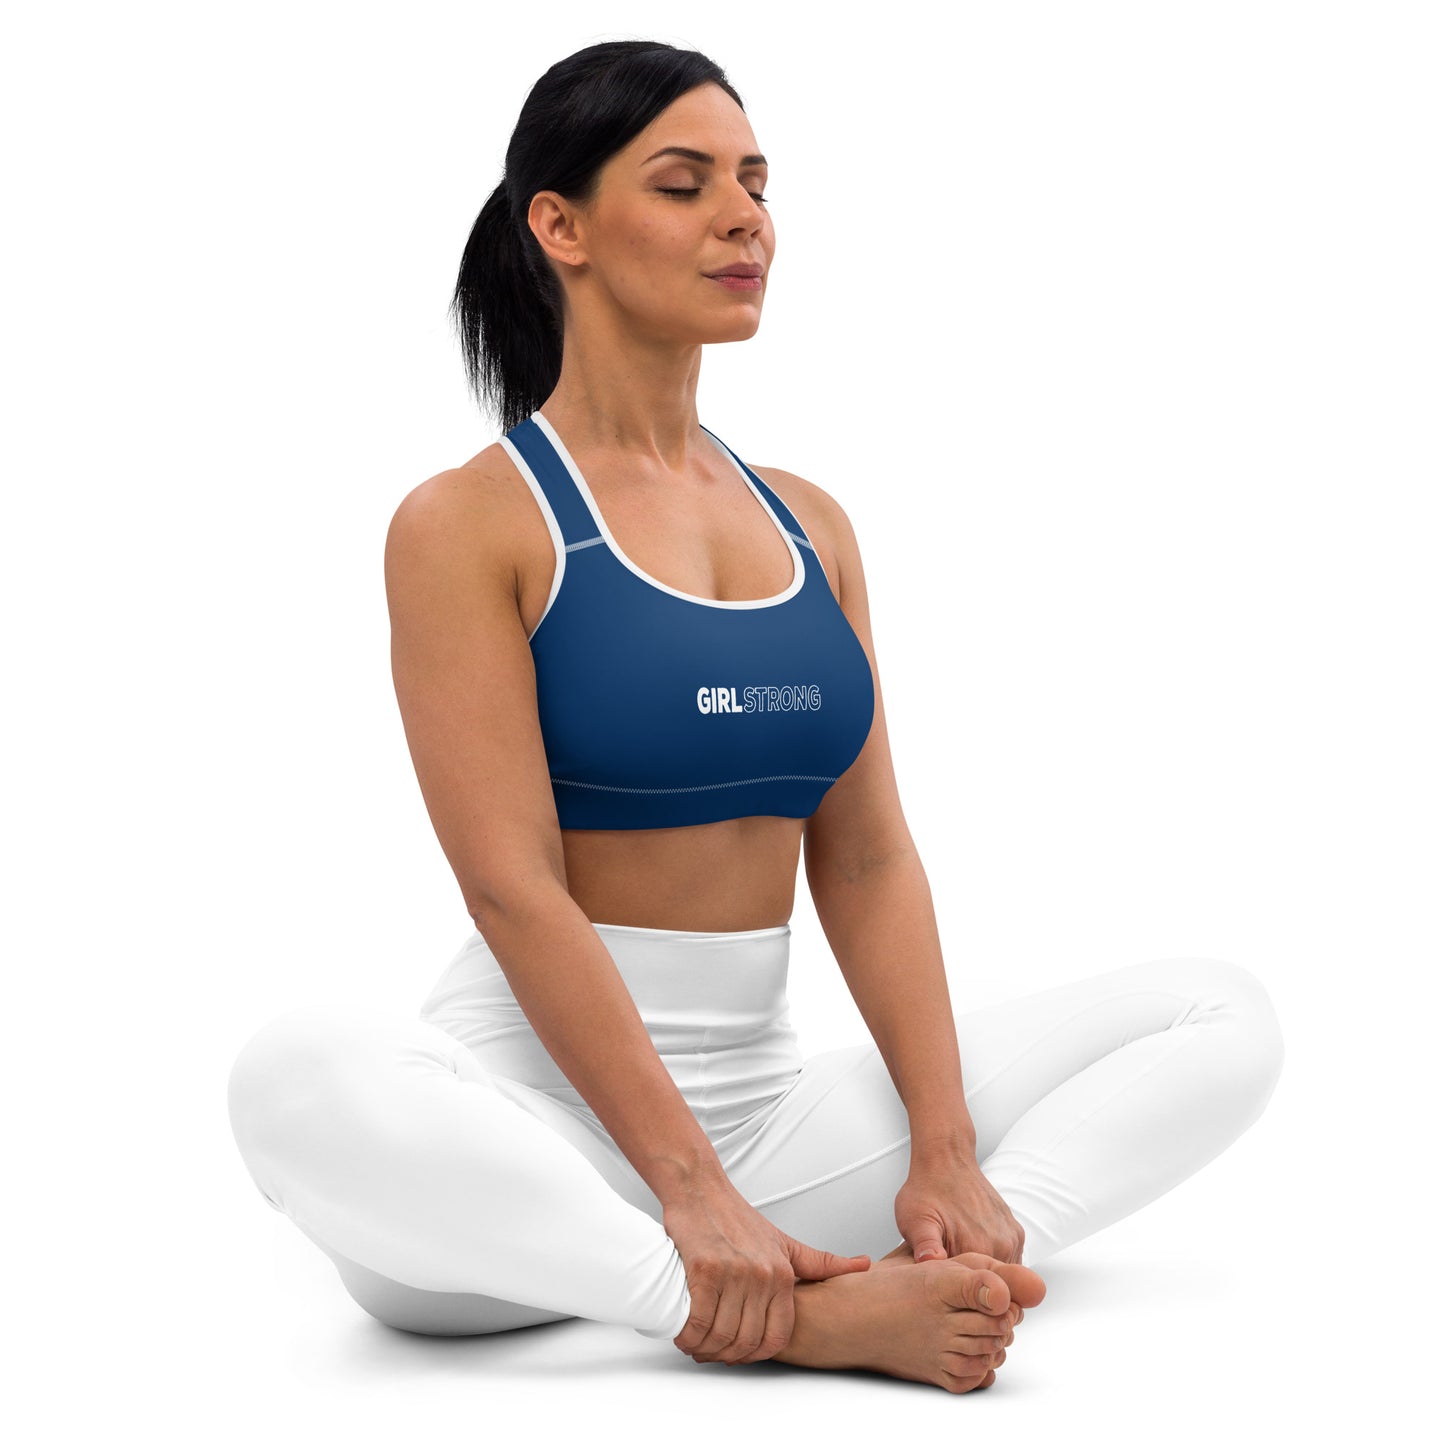 ELEVATED ESSENTIALS, THE PERFECT PADDED SPORTS BRA PENNSYLVANIA